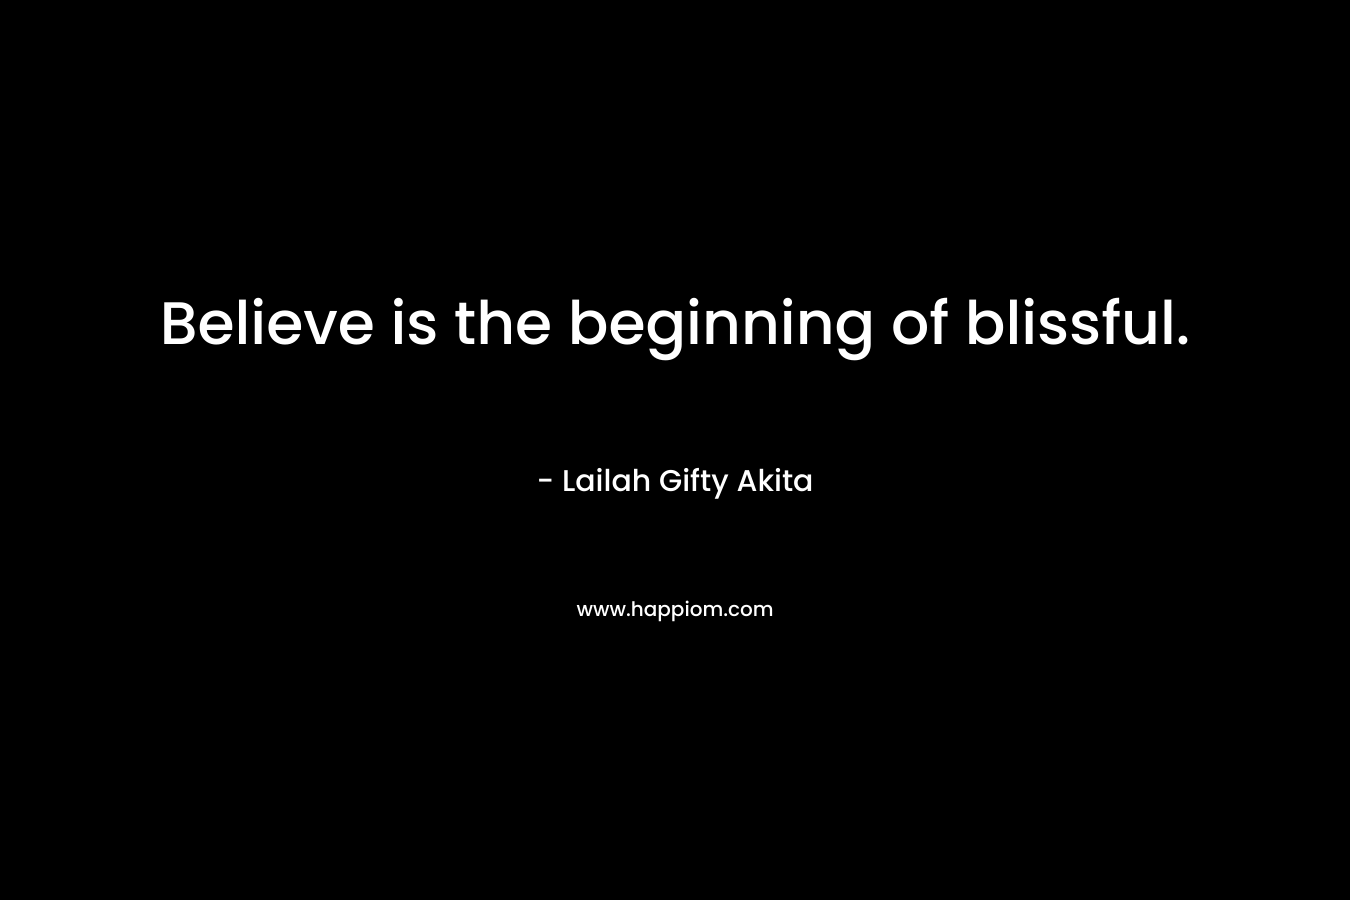 Believe is the beginning of blissful.